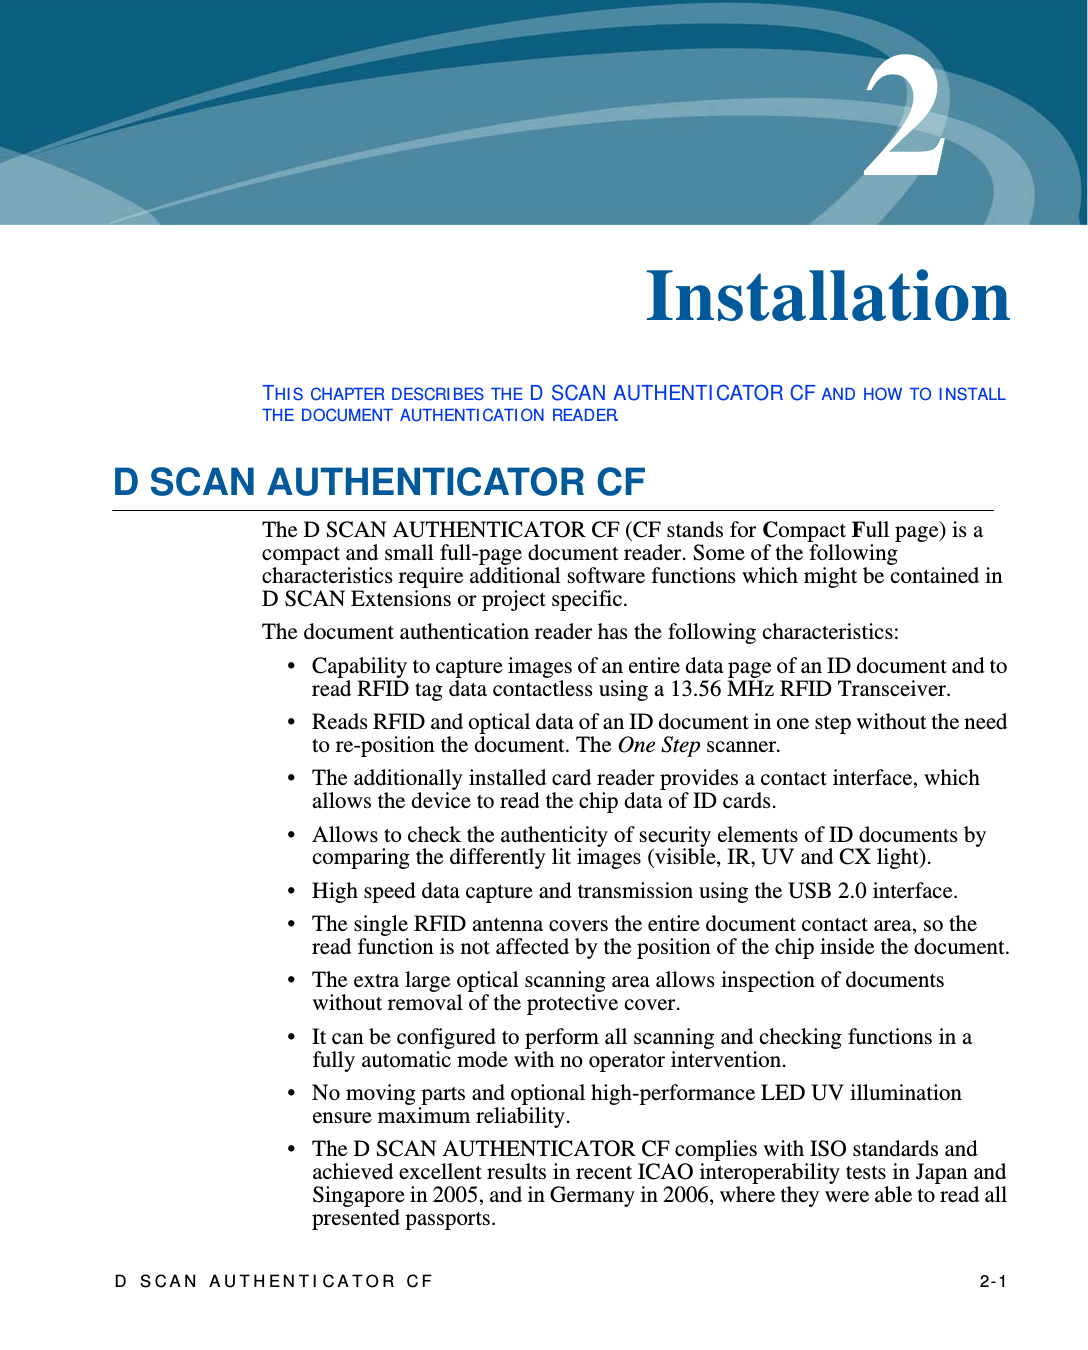 D SCAN AUTHENTI CATOR CF    2-12Chapter 0InstallationTHI S CHAPTER DESCRI BES THE D SCAN AUTHENTI CATOR CF AND HOW TO I NSTALL THE DOCUMENT AUTHENTI CATI ON READER.D SCAN AUTHENTICATOR CFThe D SCAN AUTHENTICATOR CF (CF stands for Compact Full page) is a compact and small full-page document reader. Some of the following characteristics require additional software functions which might be contained in D SCAN Extensions or project specific.The document authentication reader has the following characteristics:• Capability to capture images of an entire data page of an ID document and to read RFID tag data contactless using a 13.56 MHz RFID Transceiver.• Reads RFID and optical data of an ID document in one step without the need to re-position the document. The One Step scanner.• The additionally installed card reader provides a contact interface, which allows the device to read the chip data of ID cards.• Allows to check the authenticity of security elements of ID documents by comparing the differently lit images (visible, IR, UV and CX light).• High speed data capture and transmission using the USB 2.0 interface.• The single RFID antenna covers the entire document contact area, so the read function is not affected by the position of the chip inside the document.• The extra large optical scanning area allows inspection of documents without removal of the protective cover.• It can be configured to perform all scanning and checking functions in a fully automatic mode with no operator intervention.• No moving parts and optional high-performance LED UV illumination ensure maximum reliability.• The D SCAN AUTHENTICATOR CF complies with ISO standards and achieved excellent results in recent ICAO interoperability tests in Japan and Singapore in 2005, and in Germany in 2006, where they were able to read all presented passports.